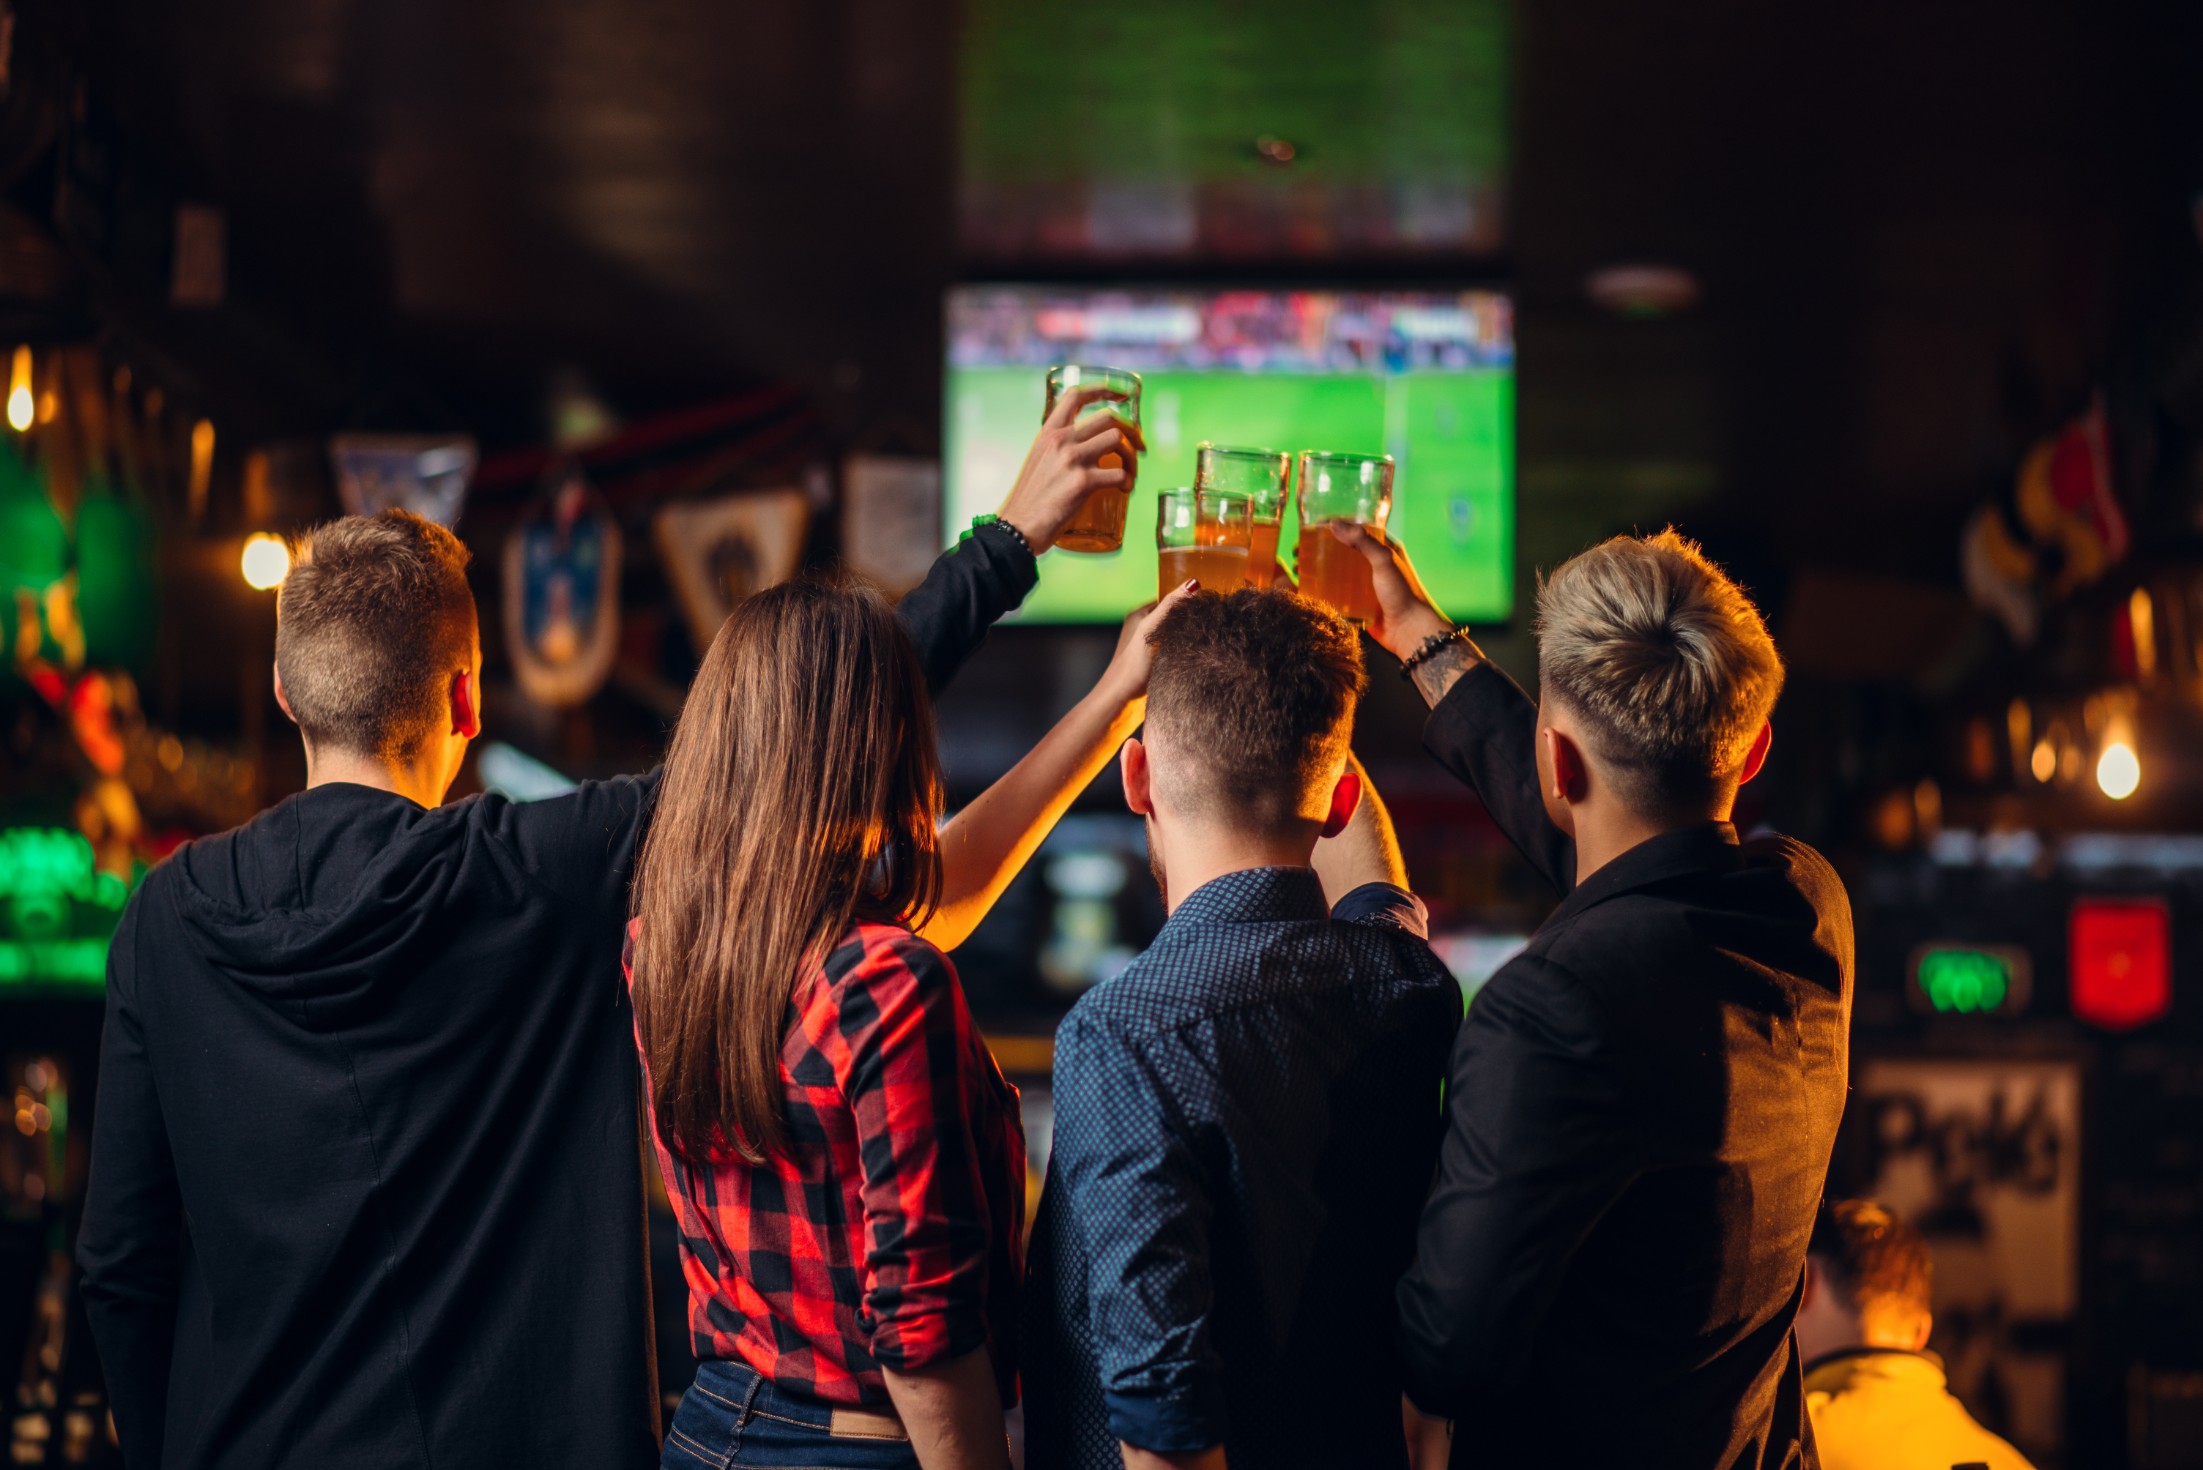 6 Great Places To Watch Your Favorite Team